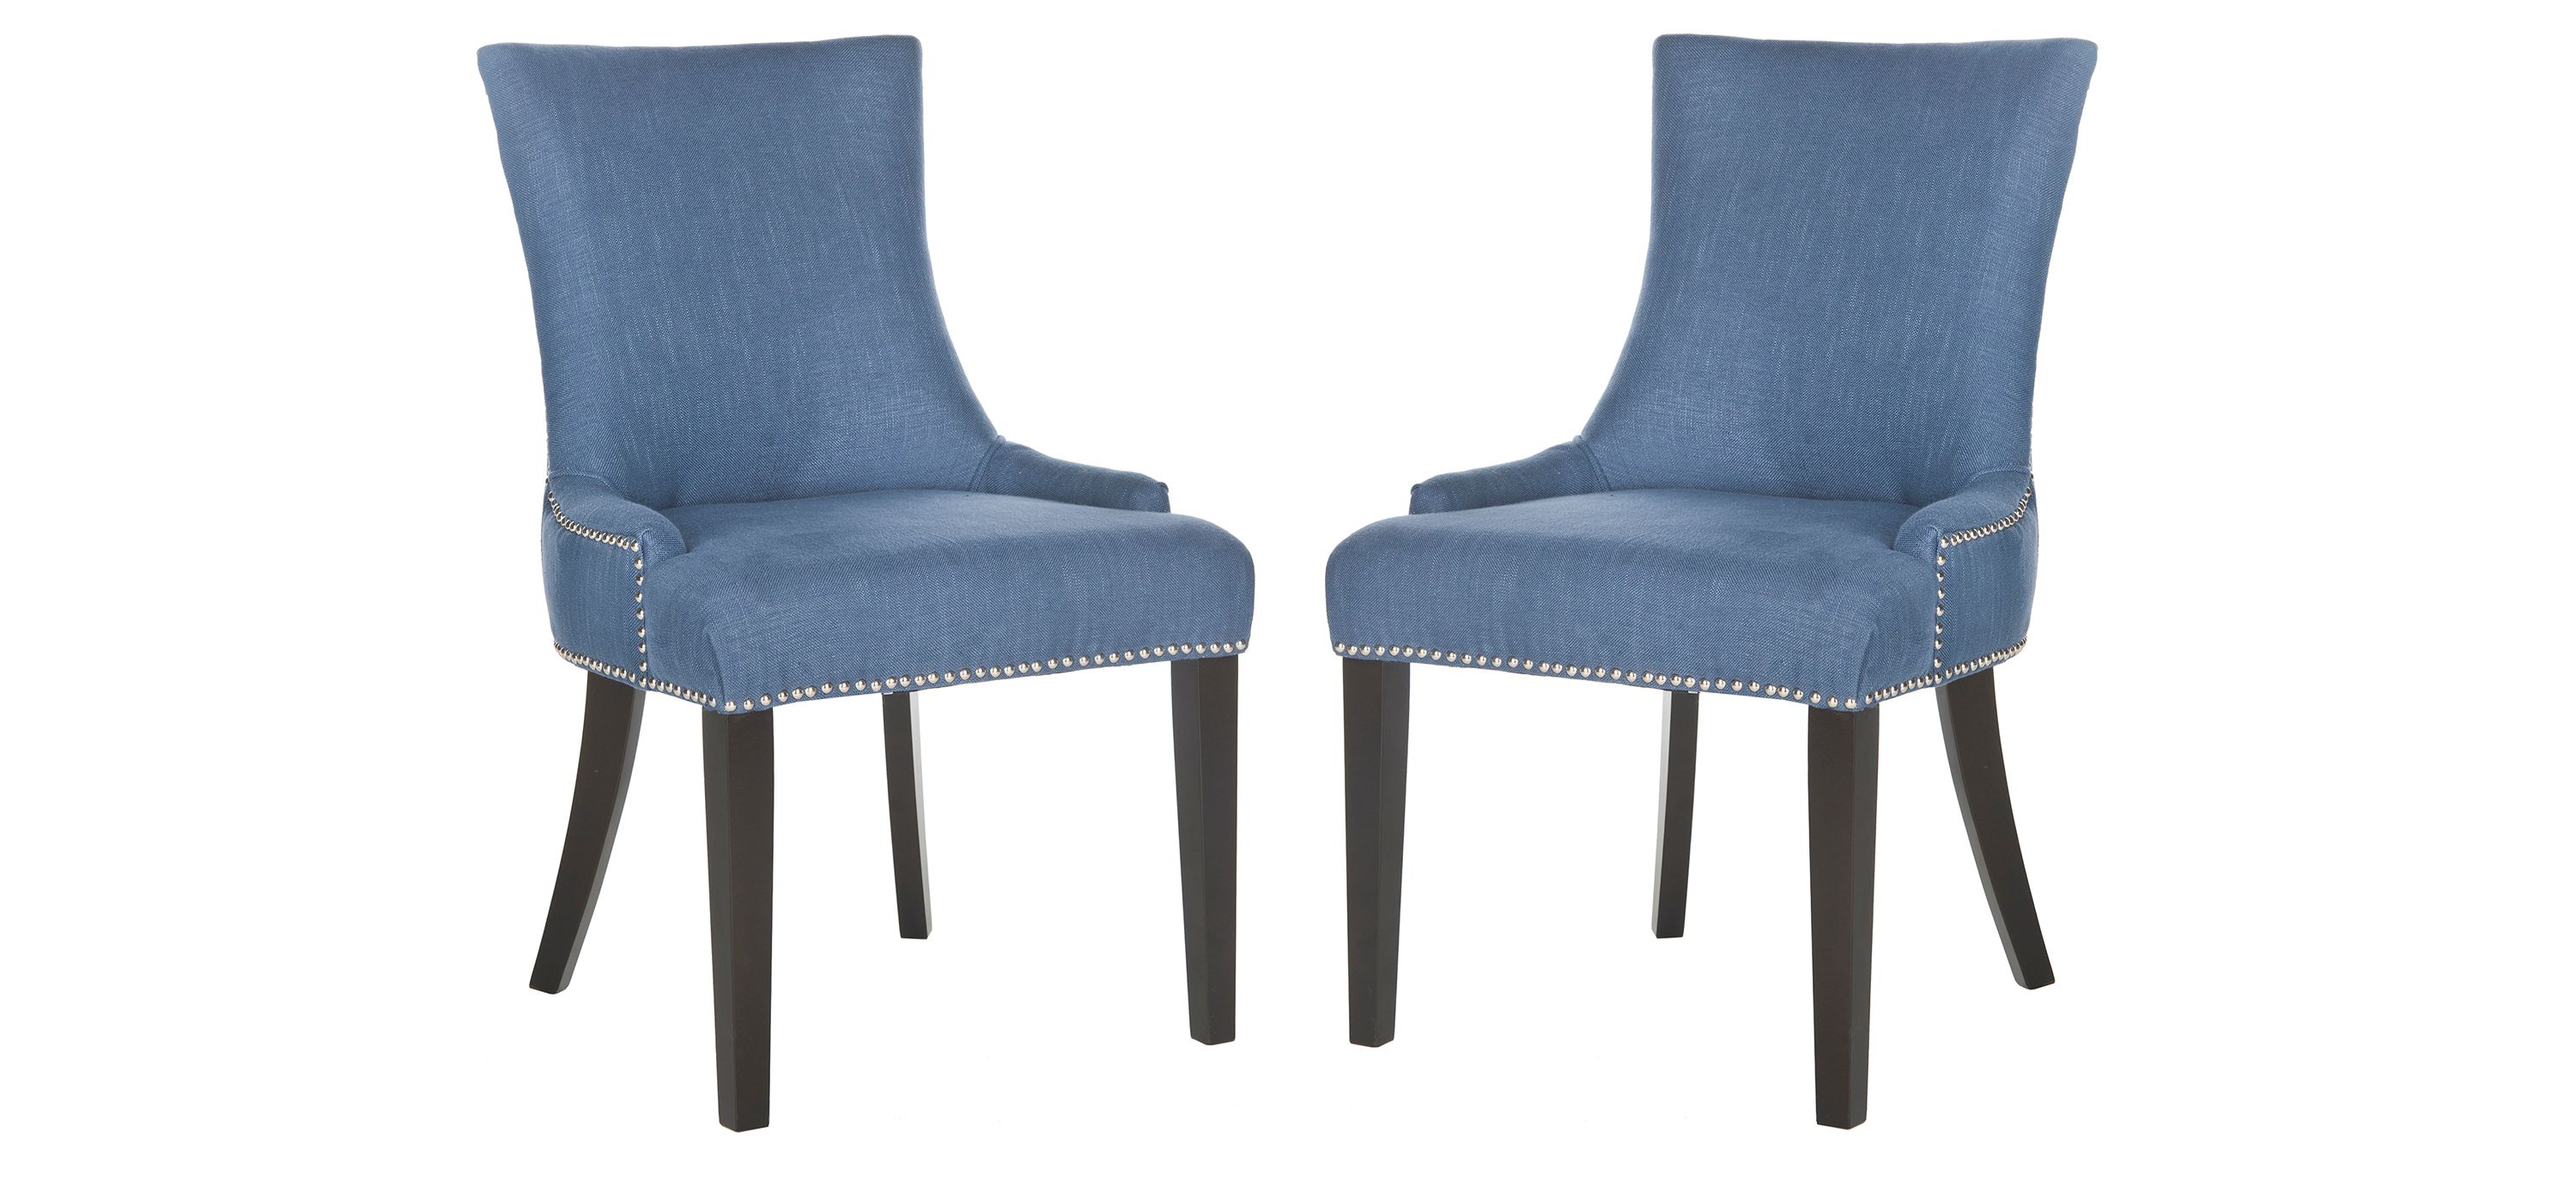 Lester Dining Chairs: Set of 2